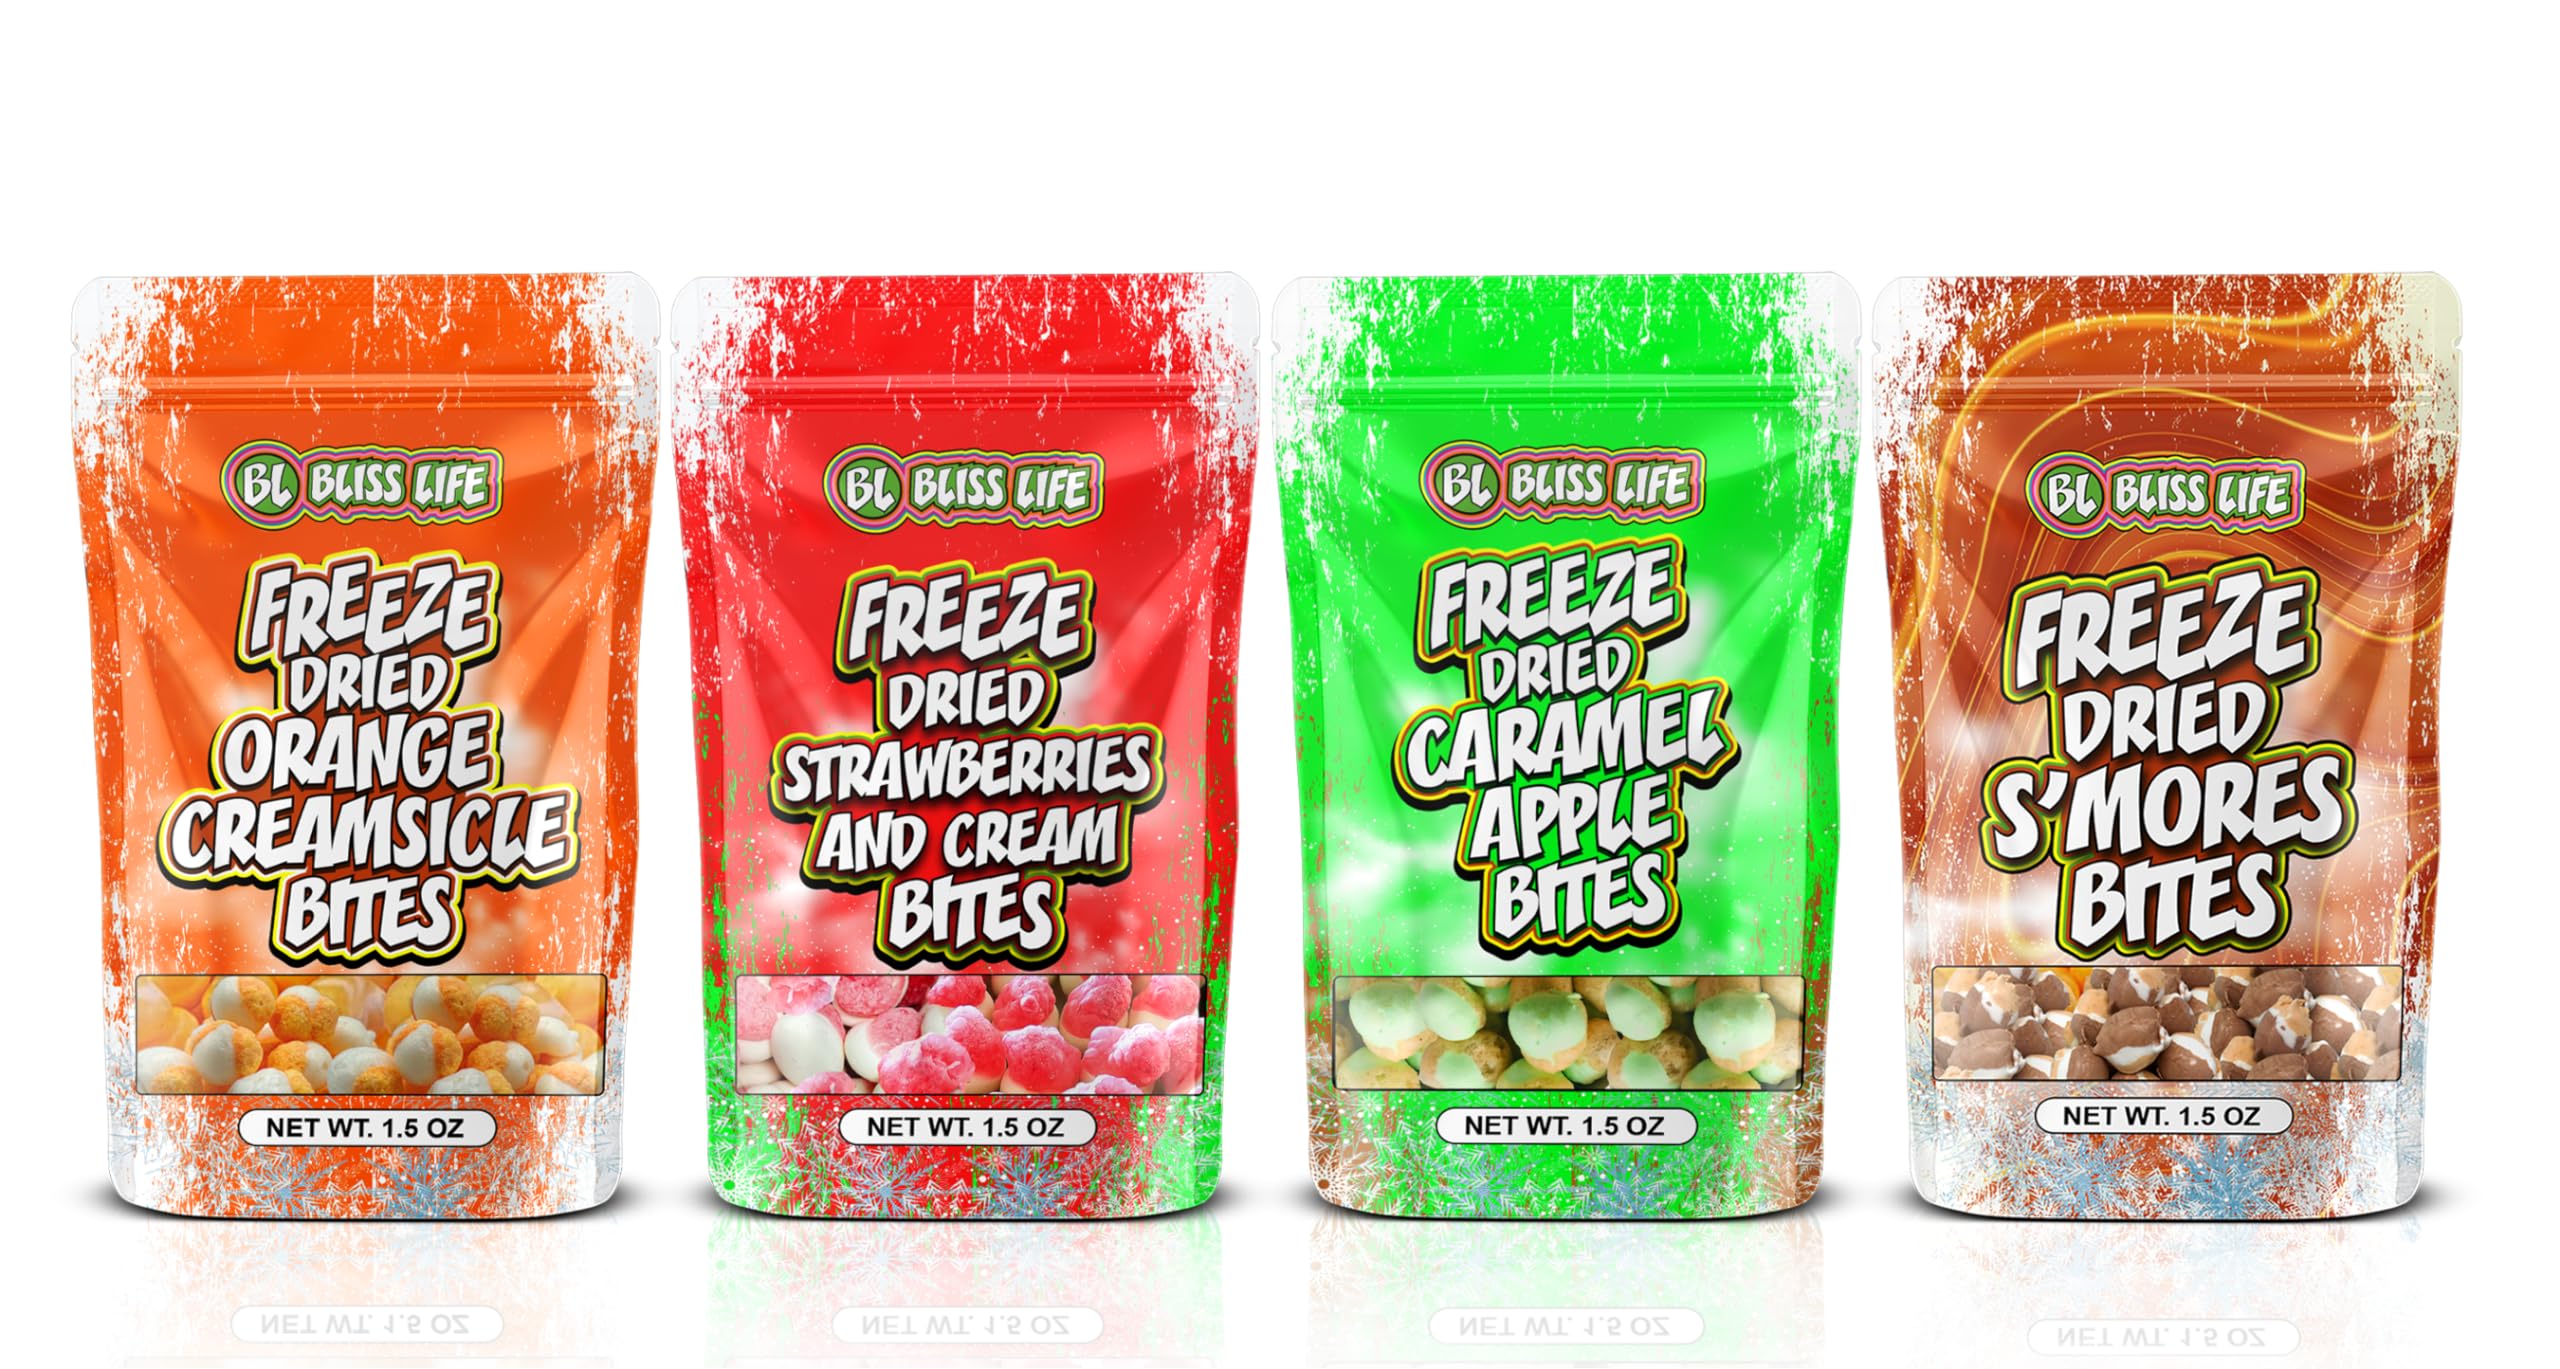 Bliss Life Jolly Puffers Freeze Dried Candy Variety Pack 2 oz, Freeze Dried Sour Candy, Unique Novelty, ASMR Candy - Great for the Tiktok Trend Most Sour Candy in the World Challenge